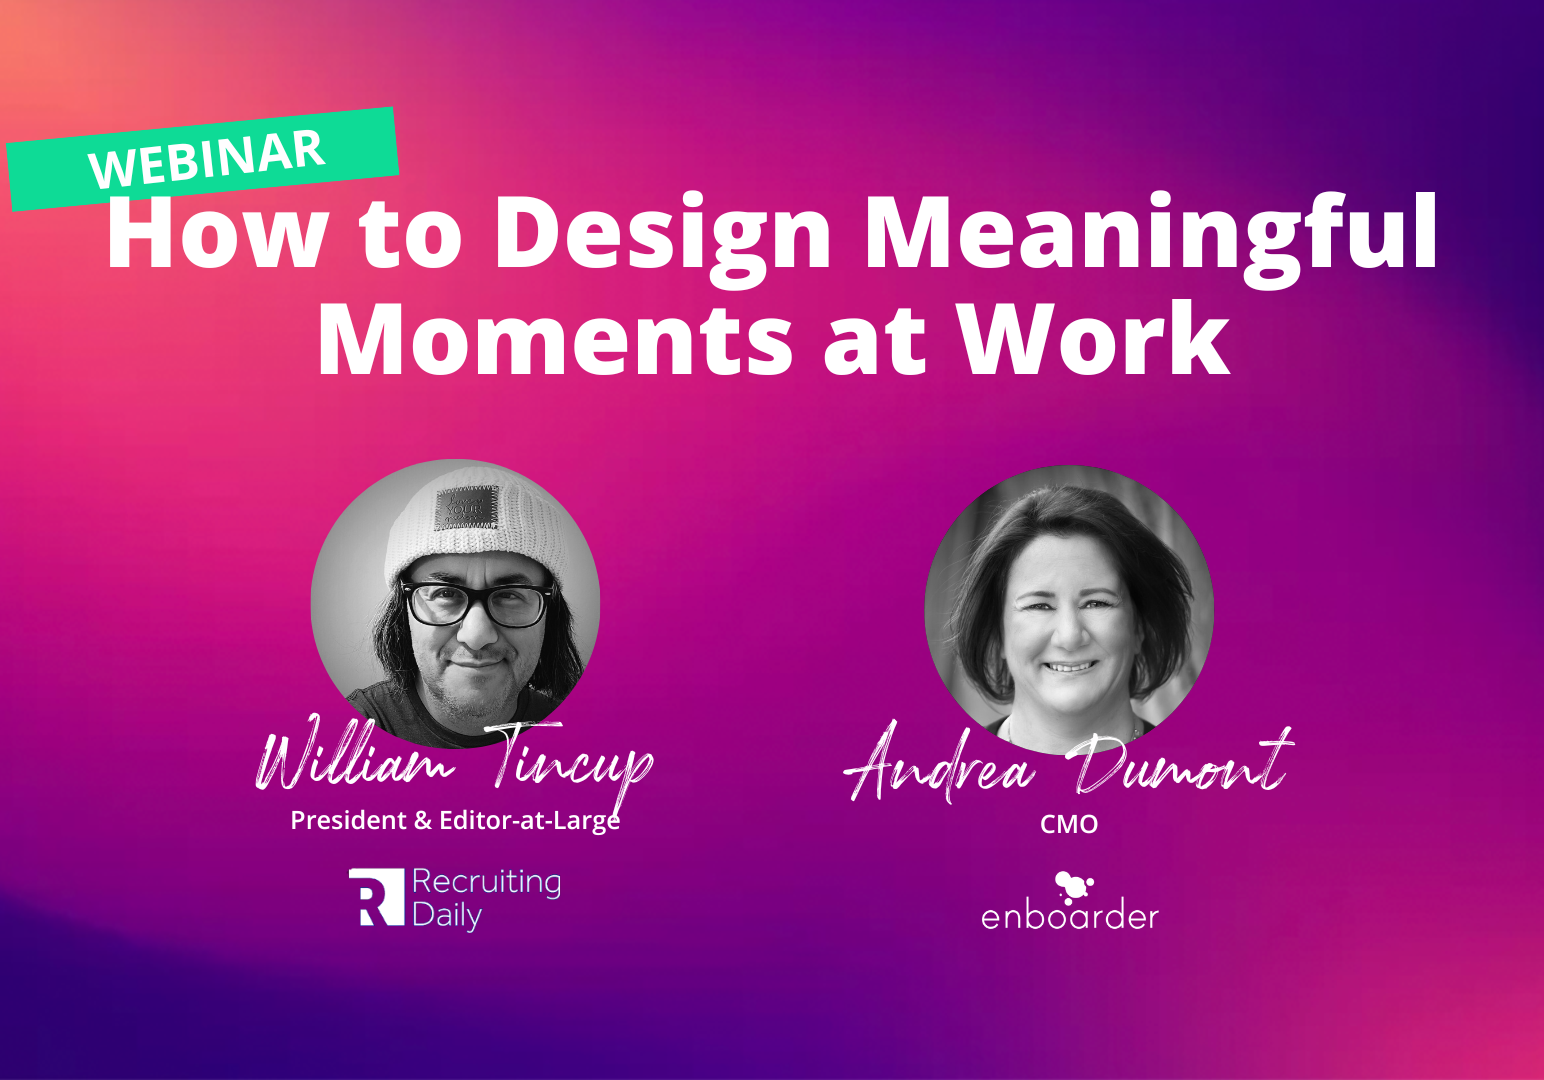 How to Design Meaningful Moments at Work